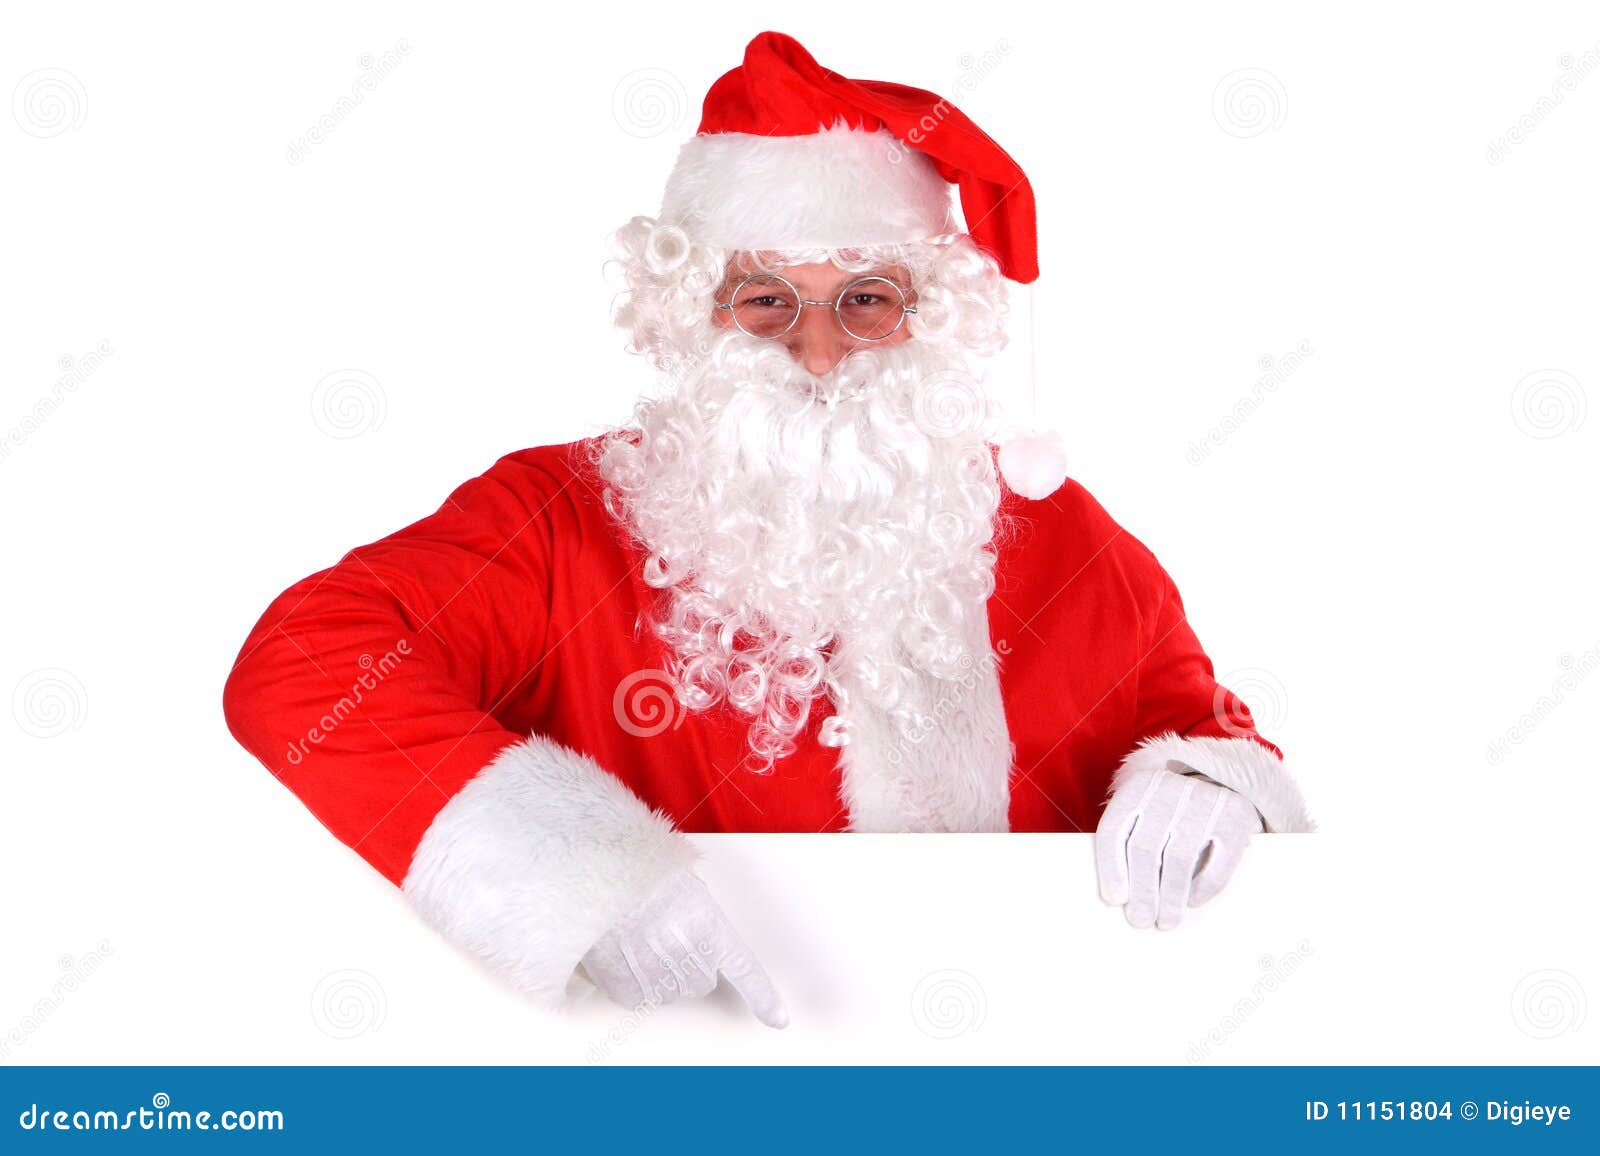 Santa Claus and blank sign stock photo. Image of sign - 11151804